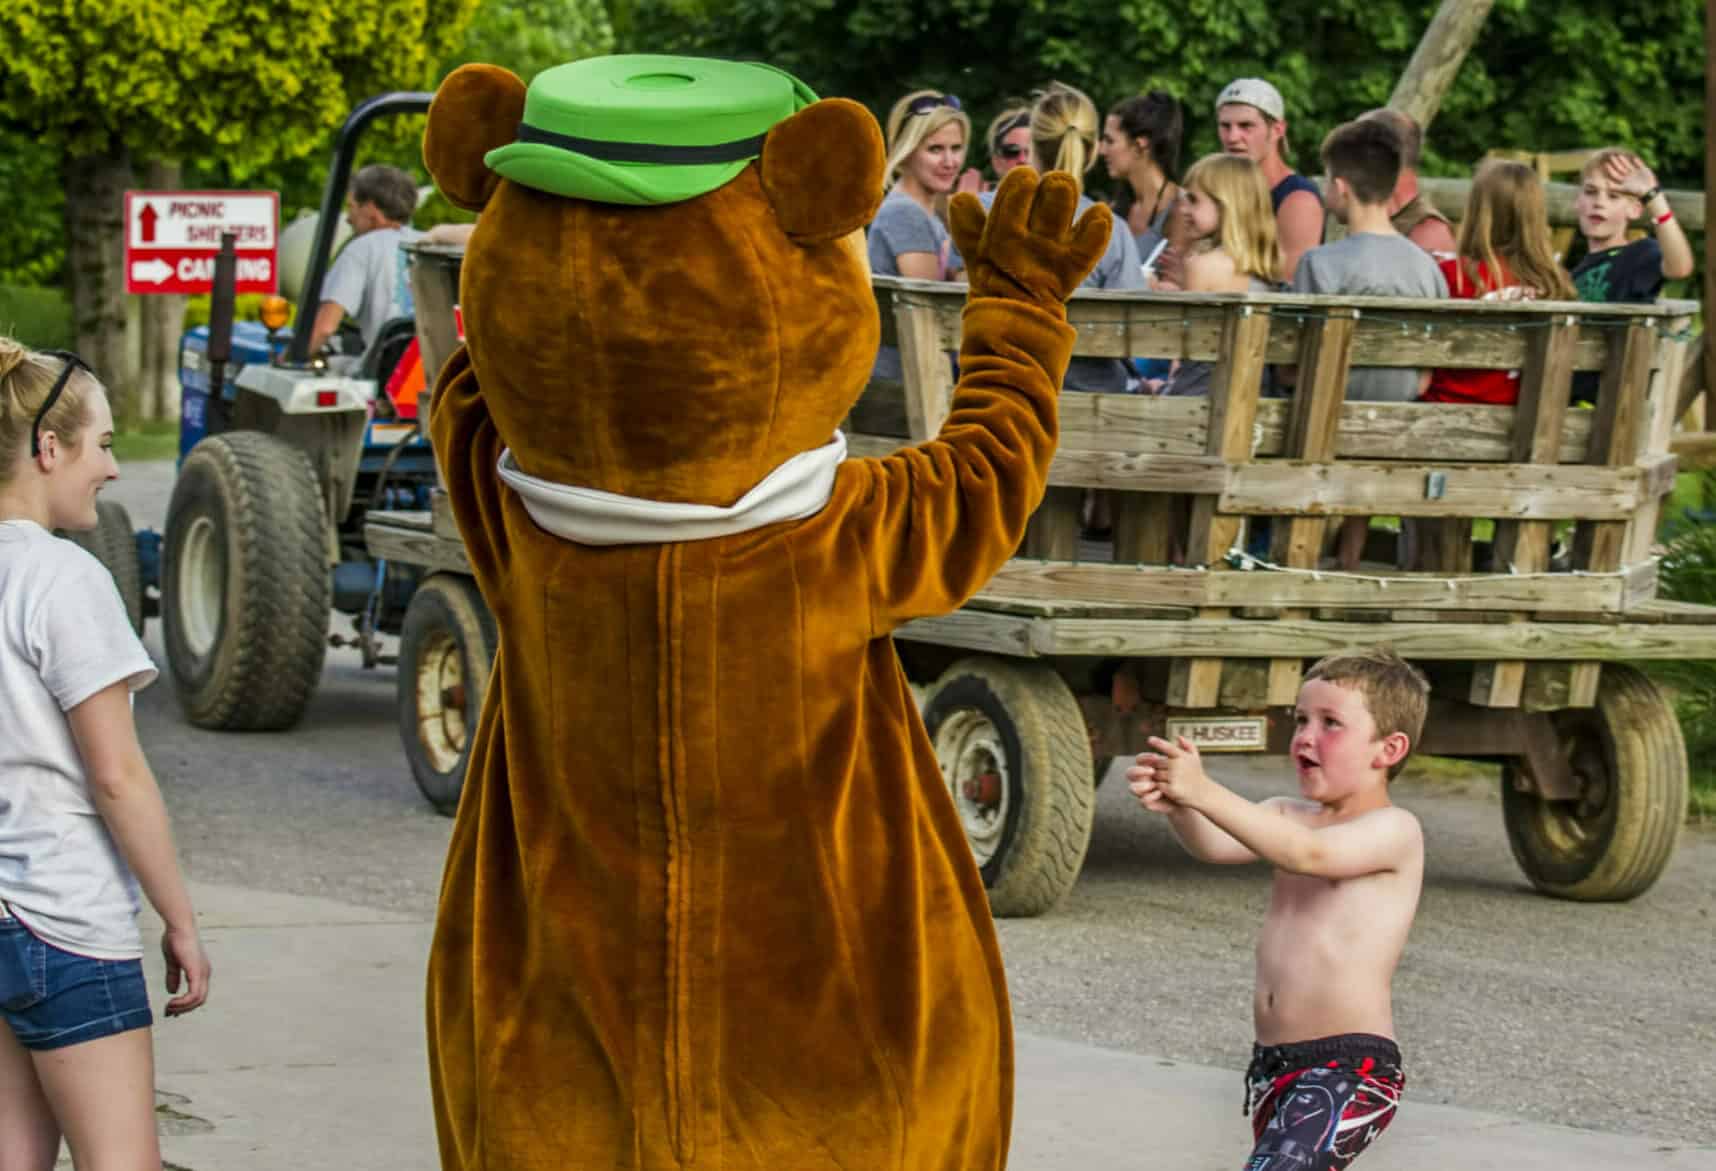 A teddy bear mascot is waving to a young boy in front of a crowd.